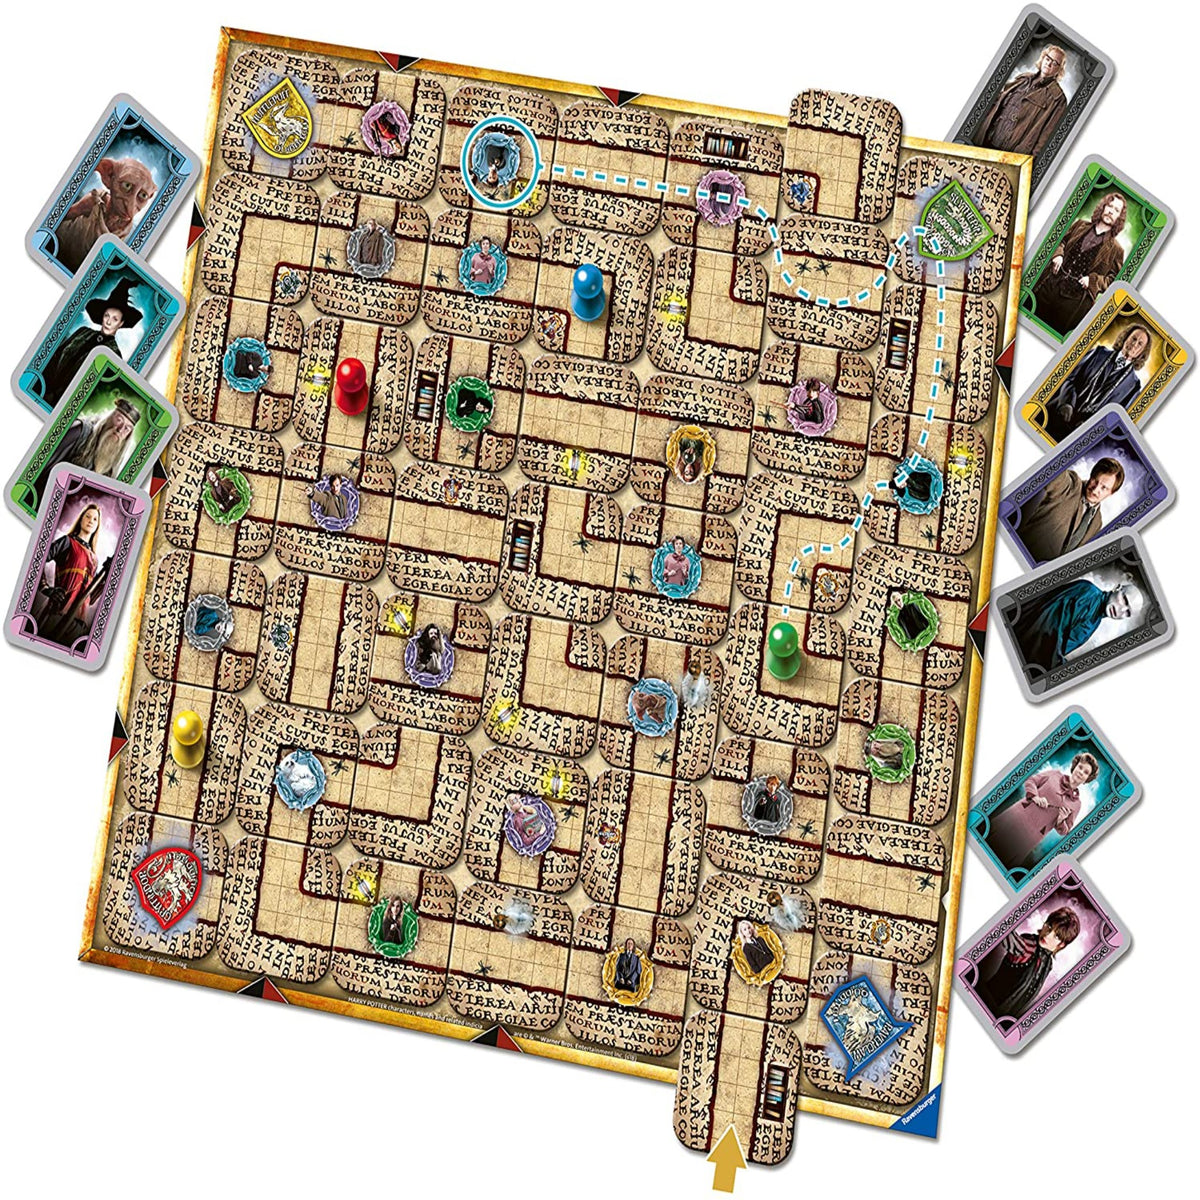  Ravensburger Harry Potter Labyrinth Family Board Game for Kids  & Adults Age 7 & Up - So Easy to Learn & Play with Great Replay Value :  Toys & Games